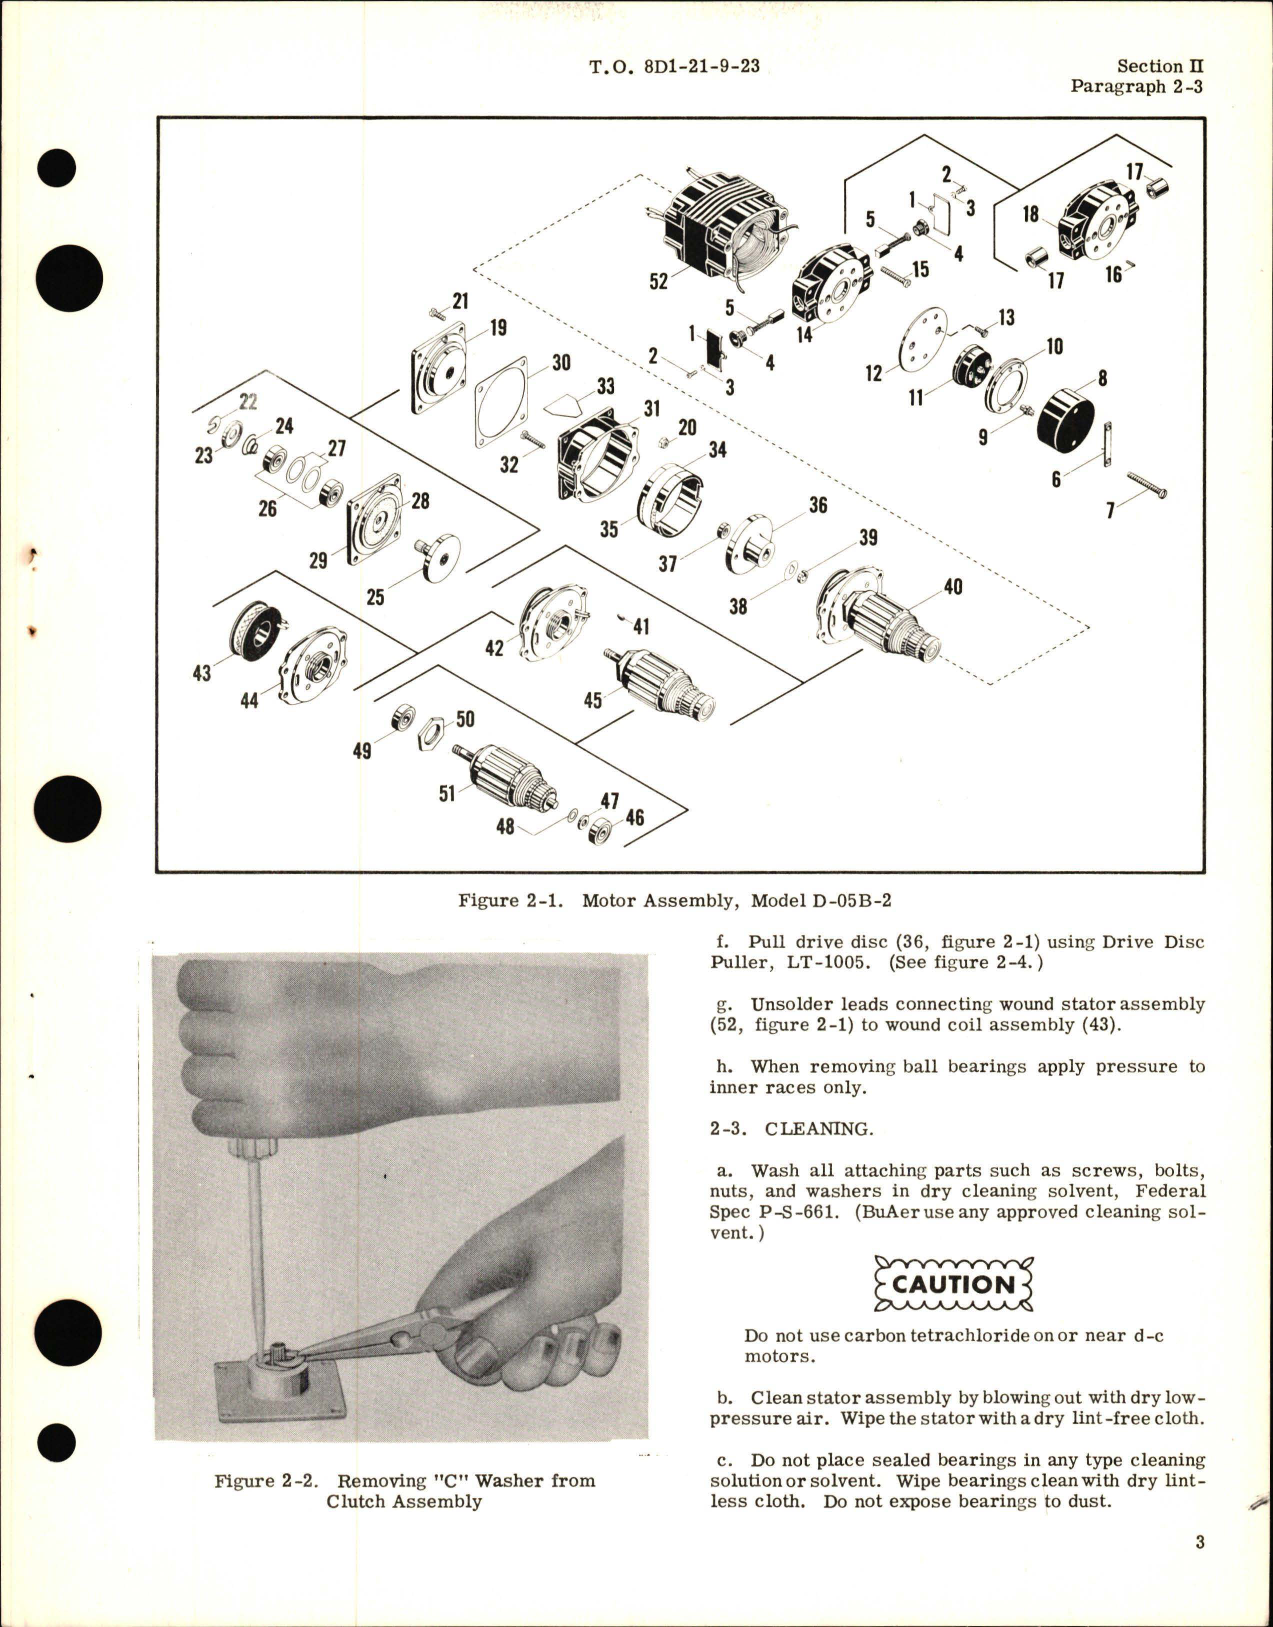 Sample page 5 from AirCorps Library document: Overhaul Instructions for Fractional Horsepower Electric Motors - D Frame Series